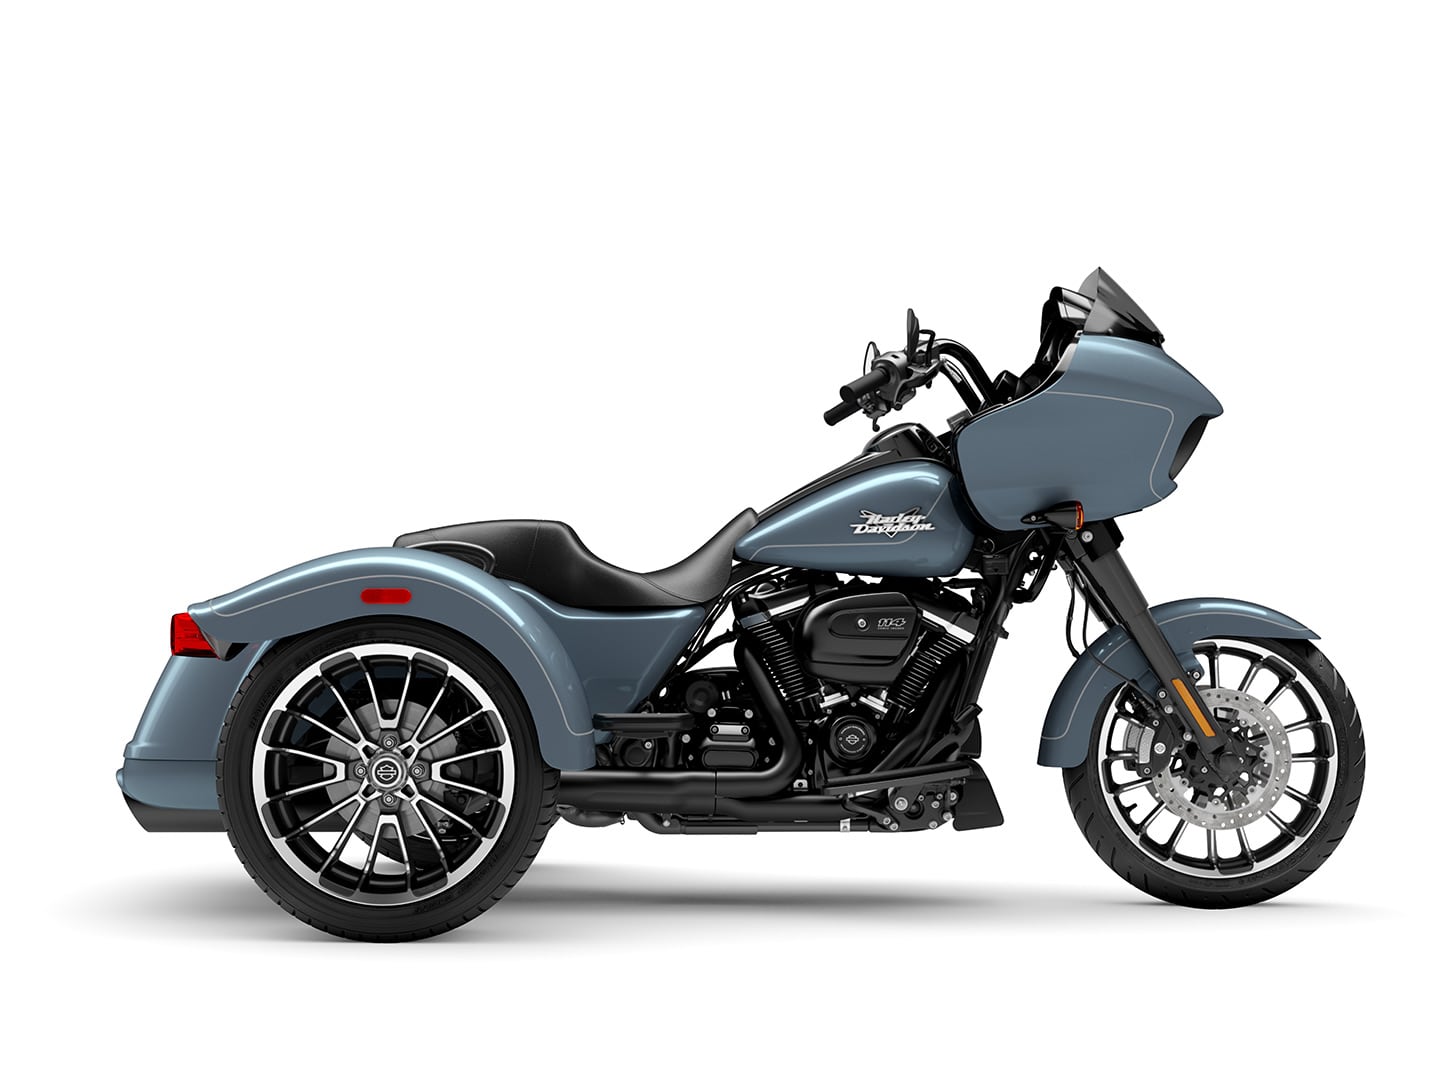 The Road Glide 3 in Sharkskin Blue ($1,000 extra).